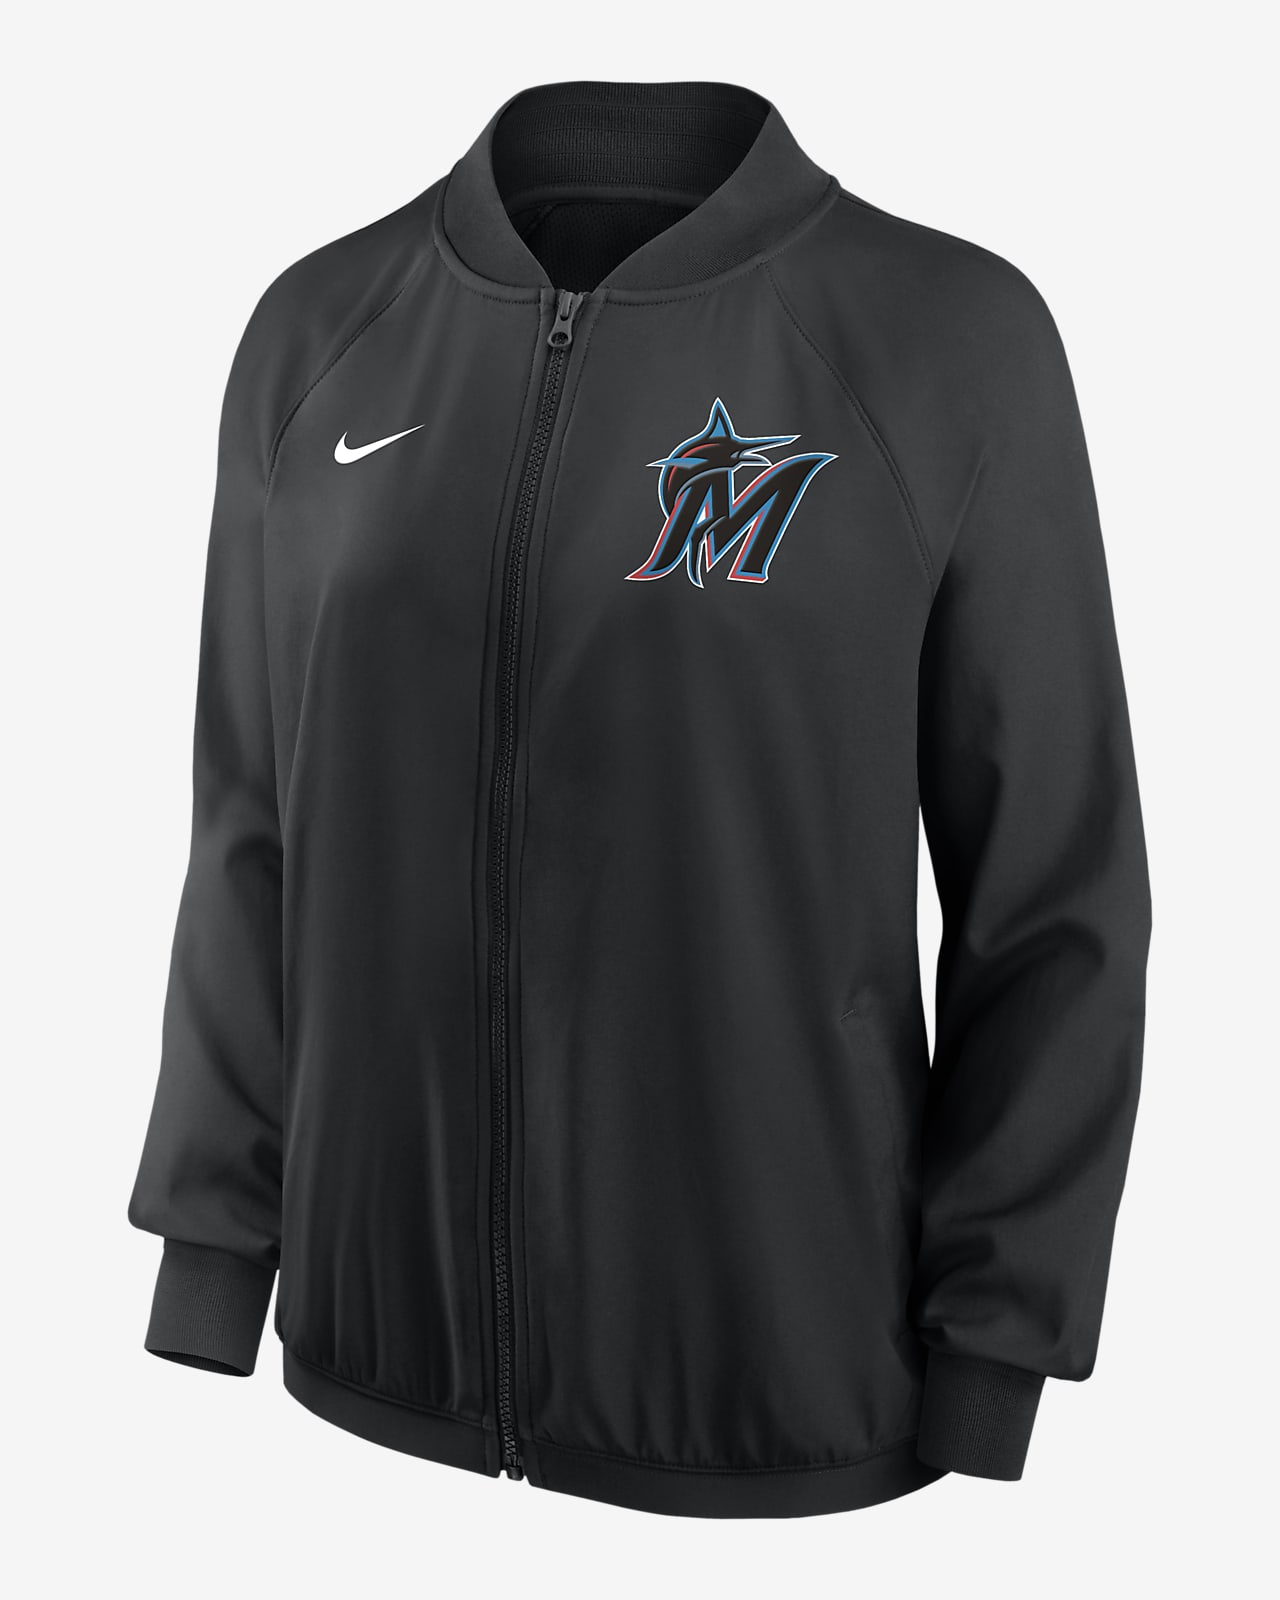 Miami Marlins Authentic Collection Team Women's Nike Dri-FIT MLB Full-Zip Jacket